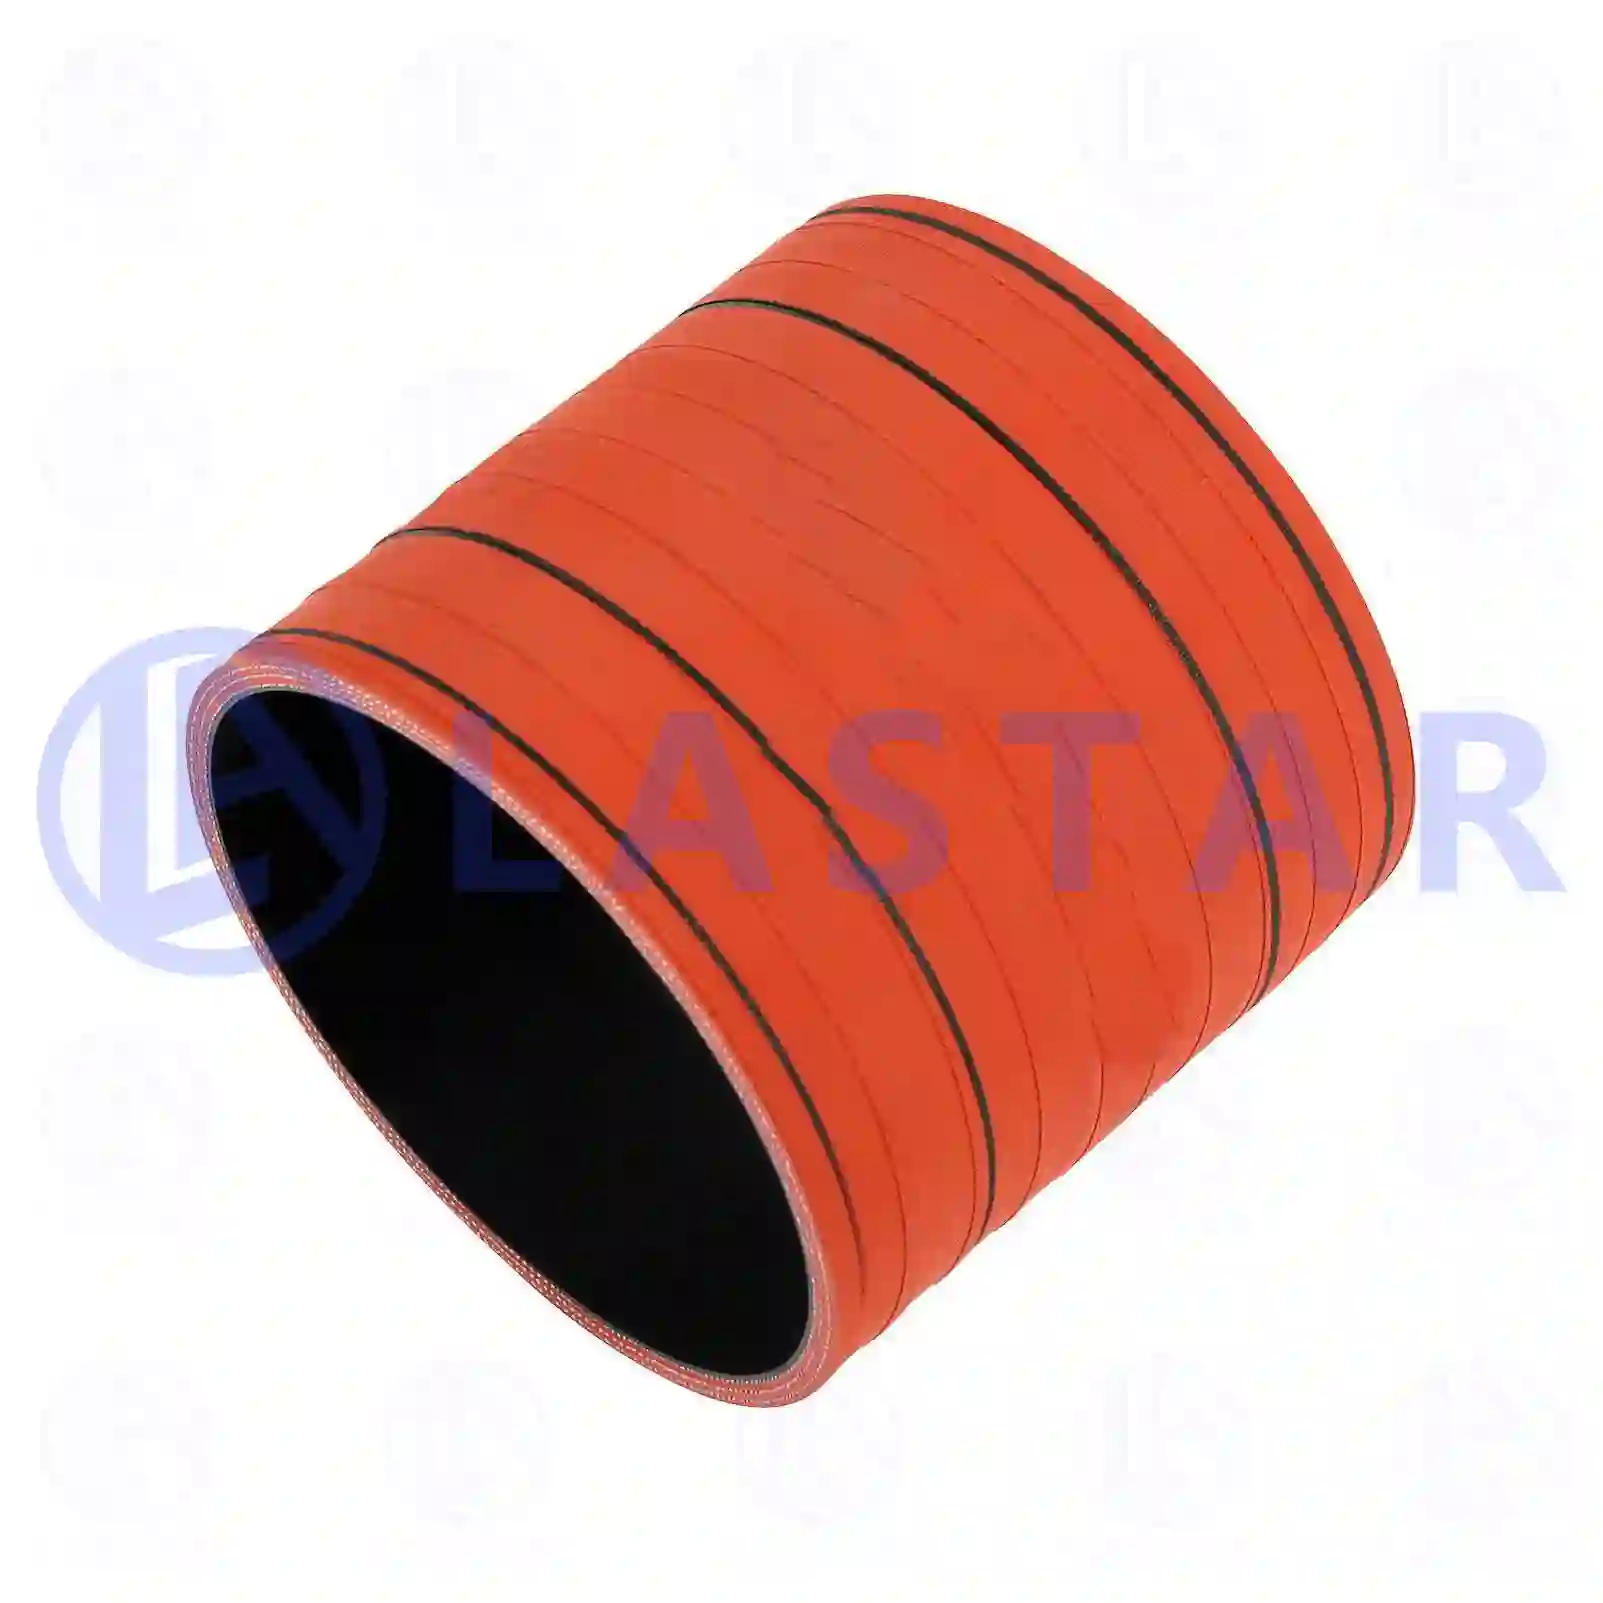 Charge air hose, 77708350, N1011009047, 0020943482, 0020946982, 6285283282, ZG00986-0008 ||  77708350 Lastar Spare Part | Truck Spare Parts, Auotomotive Spare Parts Charge air hose, 77708350, N1011009047, 0020943482, 0020946982, 6285283282, ZG00986-0008 ||  77708350 Lastar Spare Part | Truck Spare Parts, Auotomotive Spare Parts